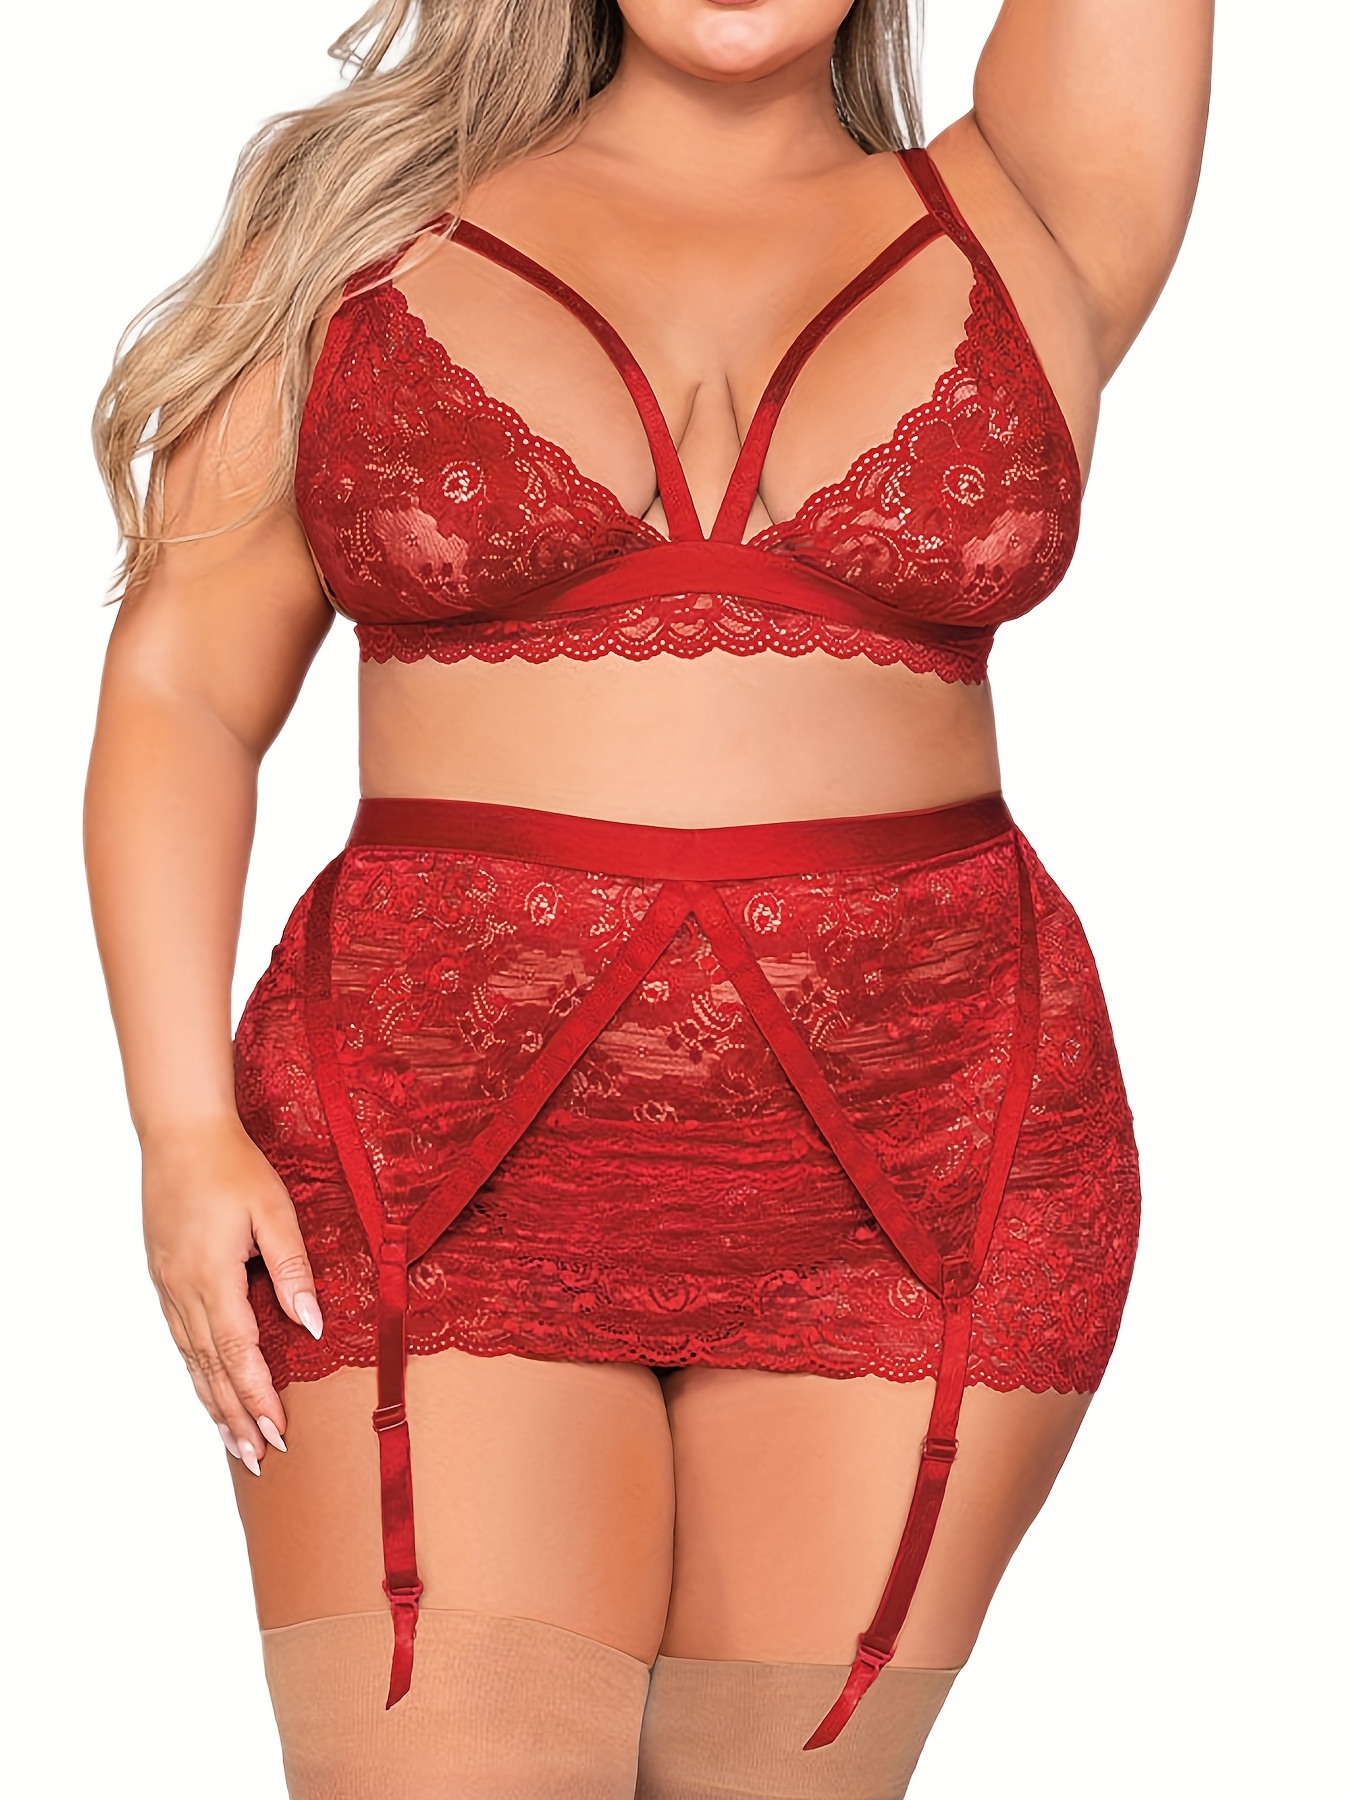  Plus Size Lingerie for Women Sexy Naughty Corset Set